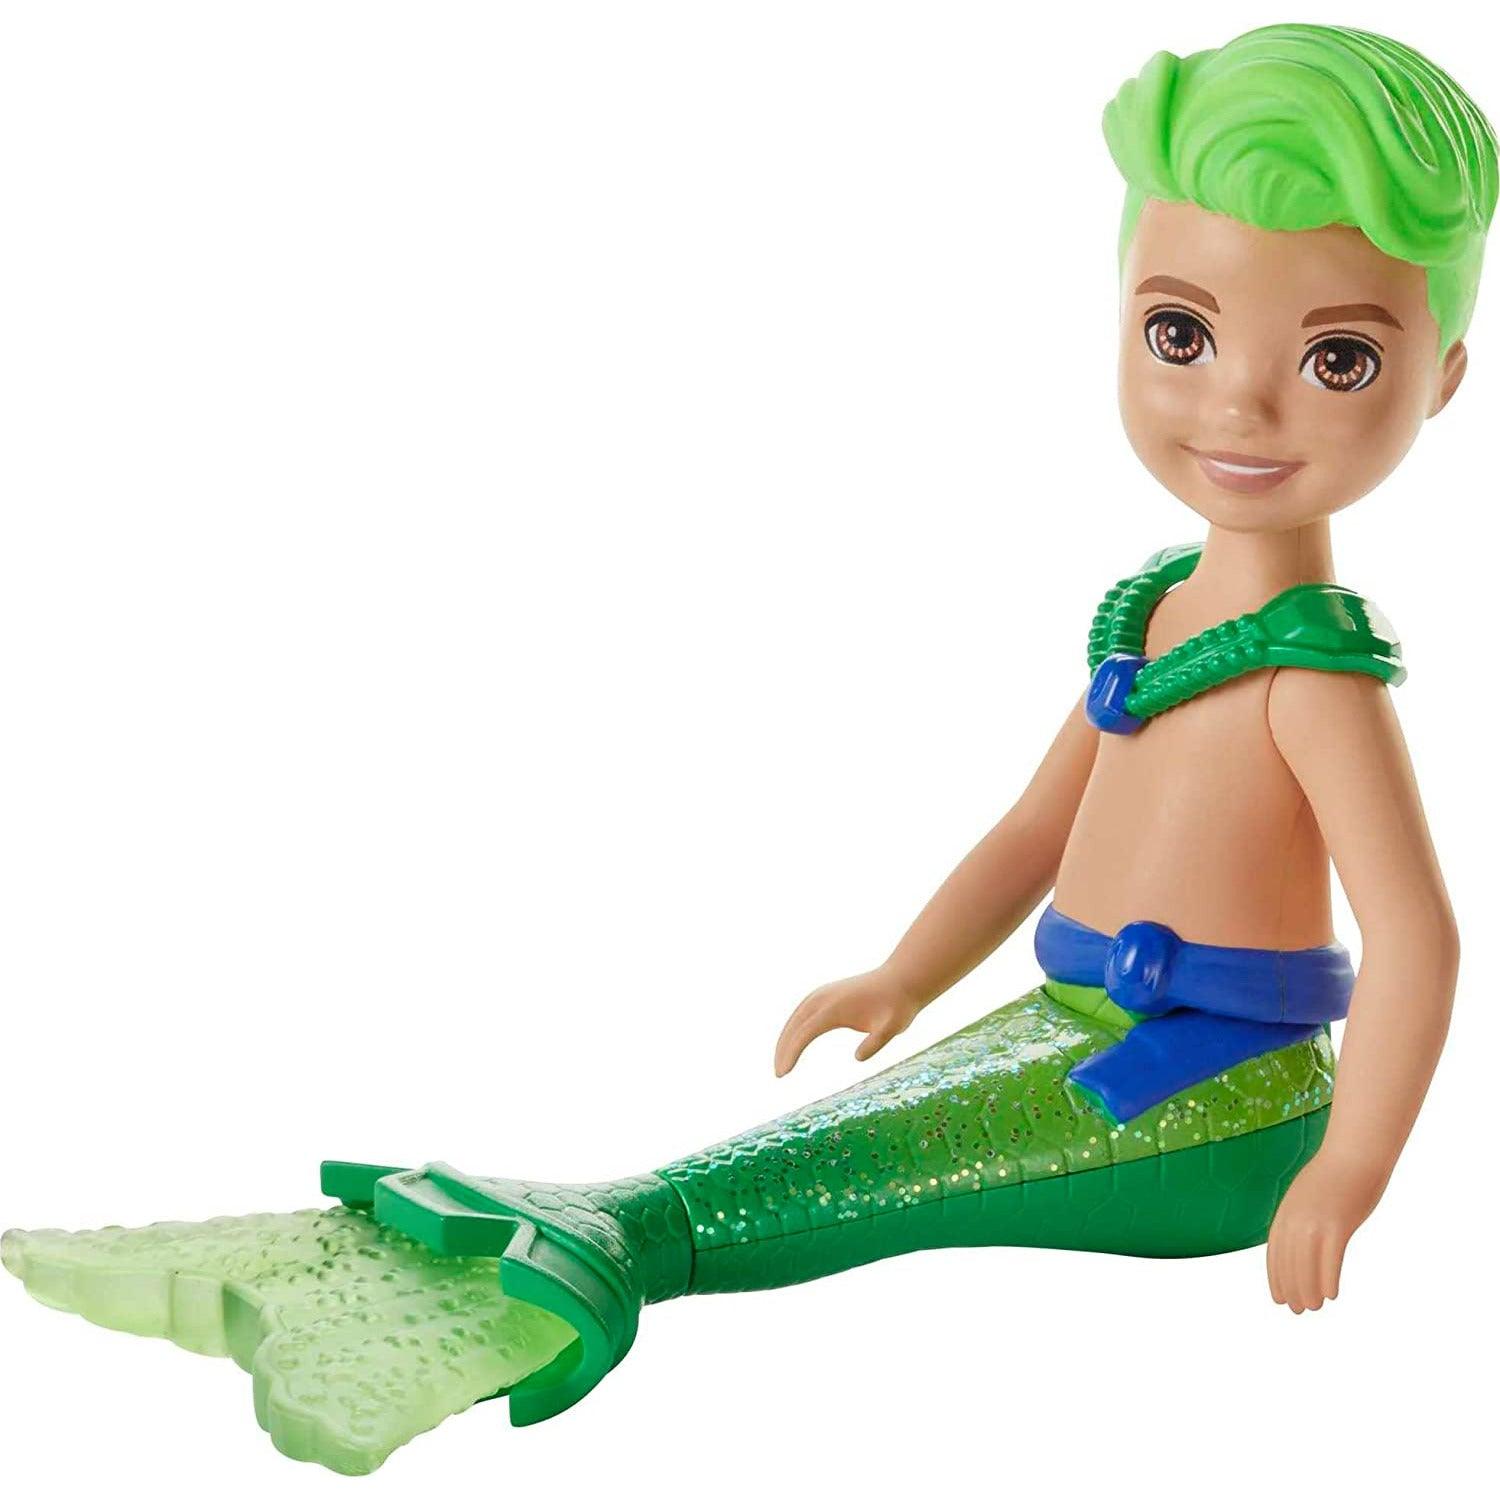 Barbie Dreamtopia Chelsea Merboy Doll with Green Hair & Tail - BumbleToys - 5-7 Years, Barbie, Dreamtopia, Fashion Dolls & Accessories, Girls, Mermaid, Pre-Order